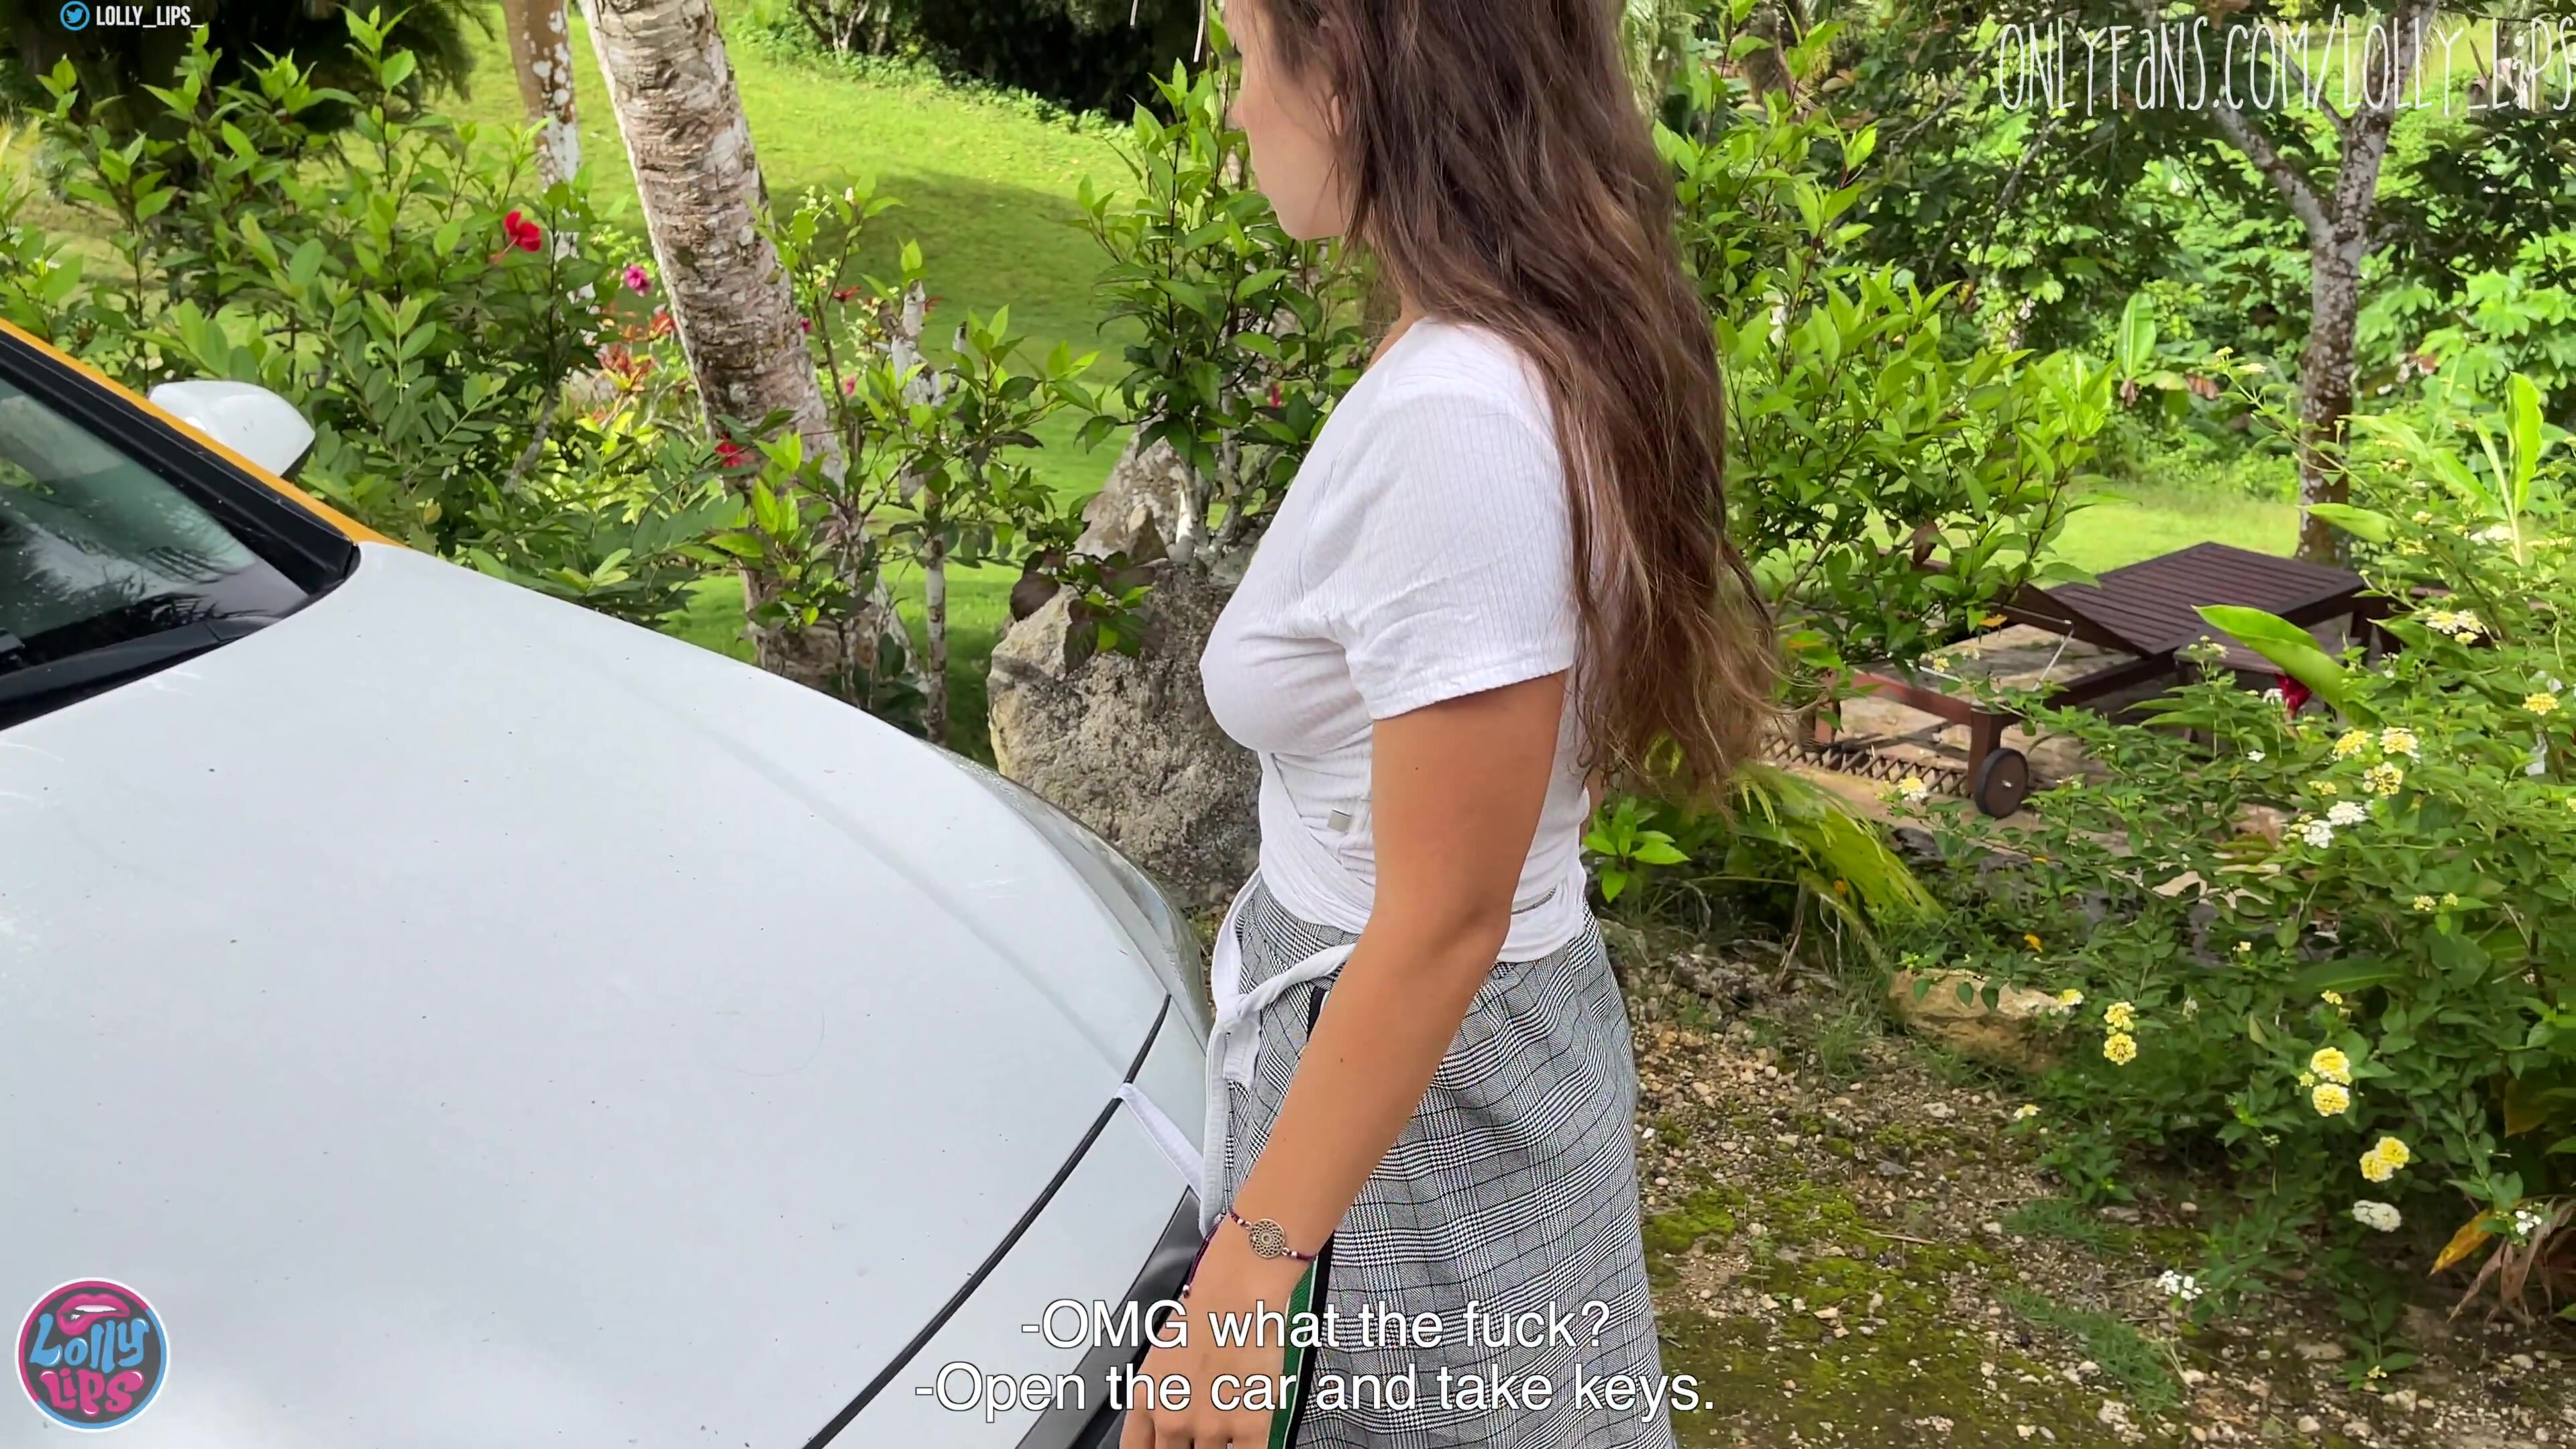 Loly Lips - I Helped to Stranger With Big Tits to Check Her Car. and She Doesn't Mind Having Sex With Me